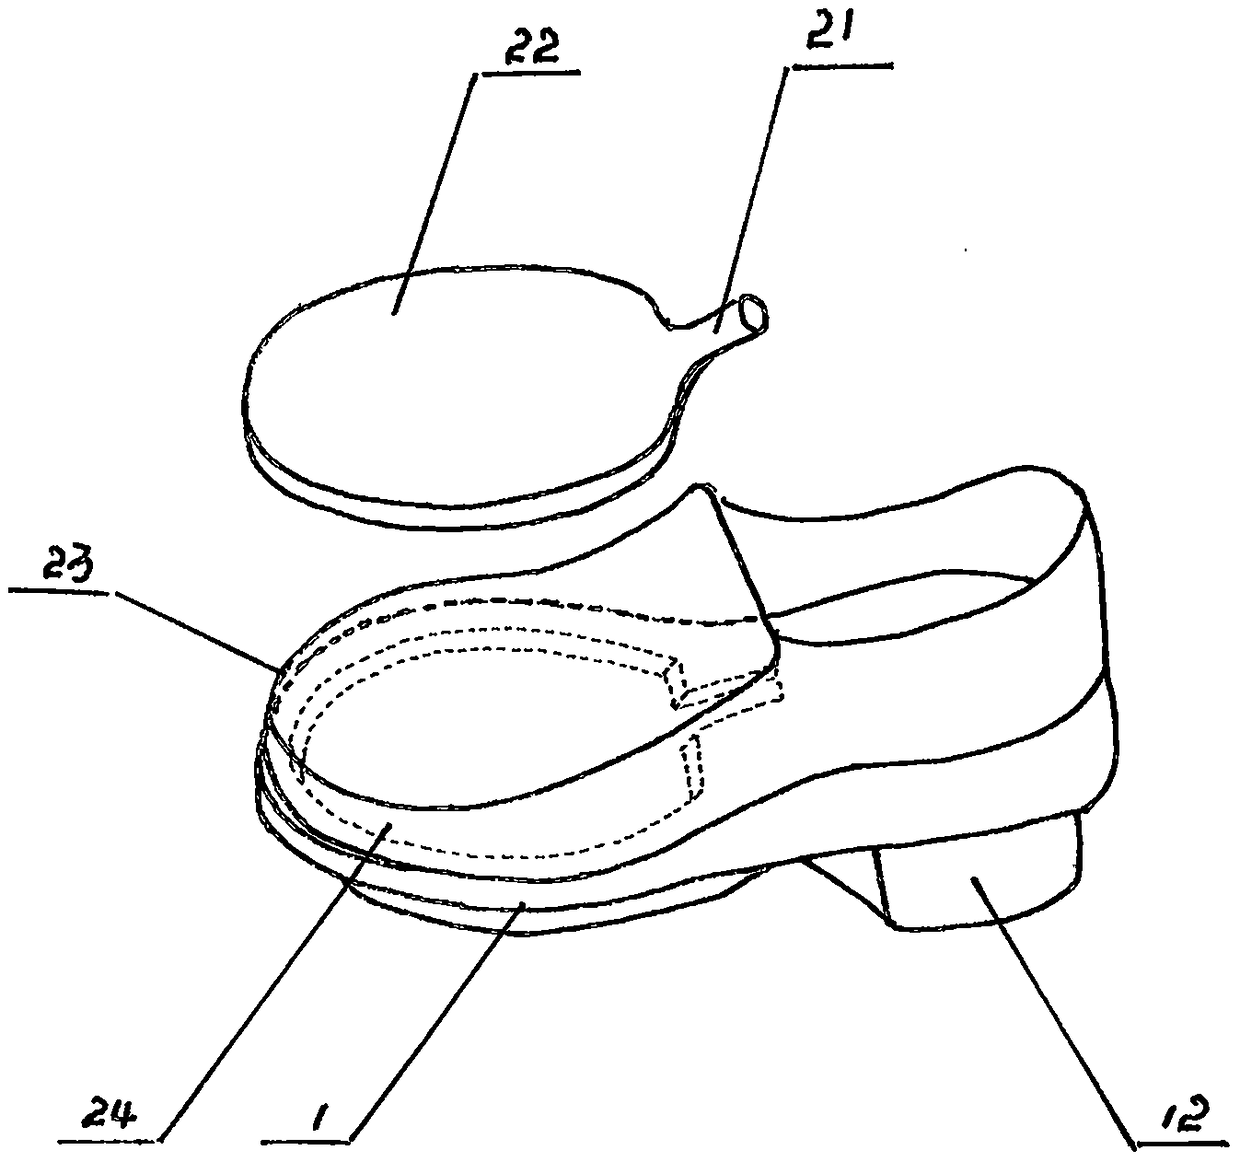 Through sole-variable spring shoe